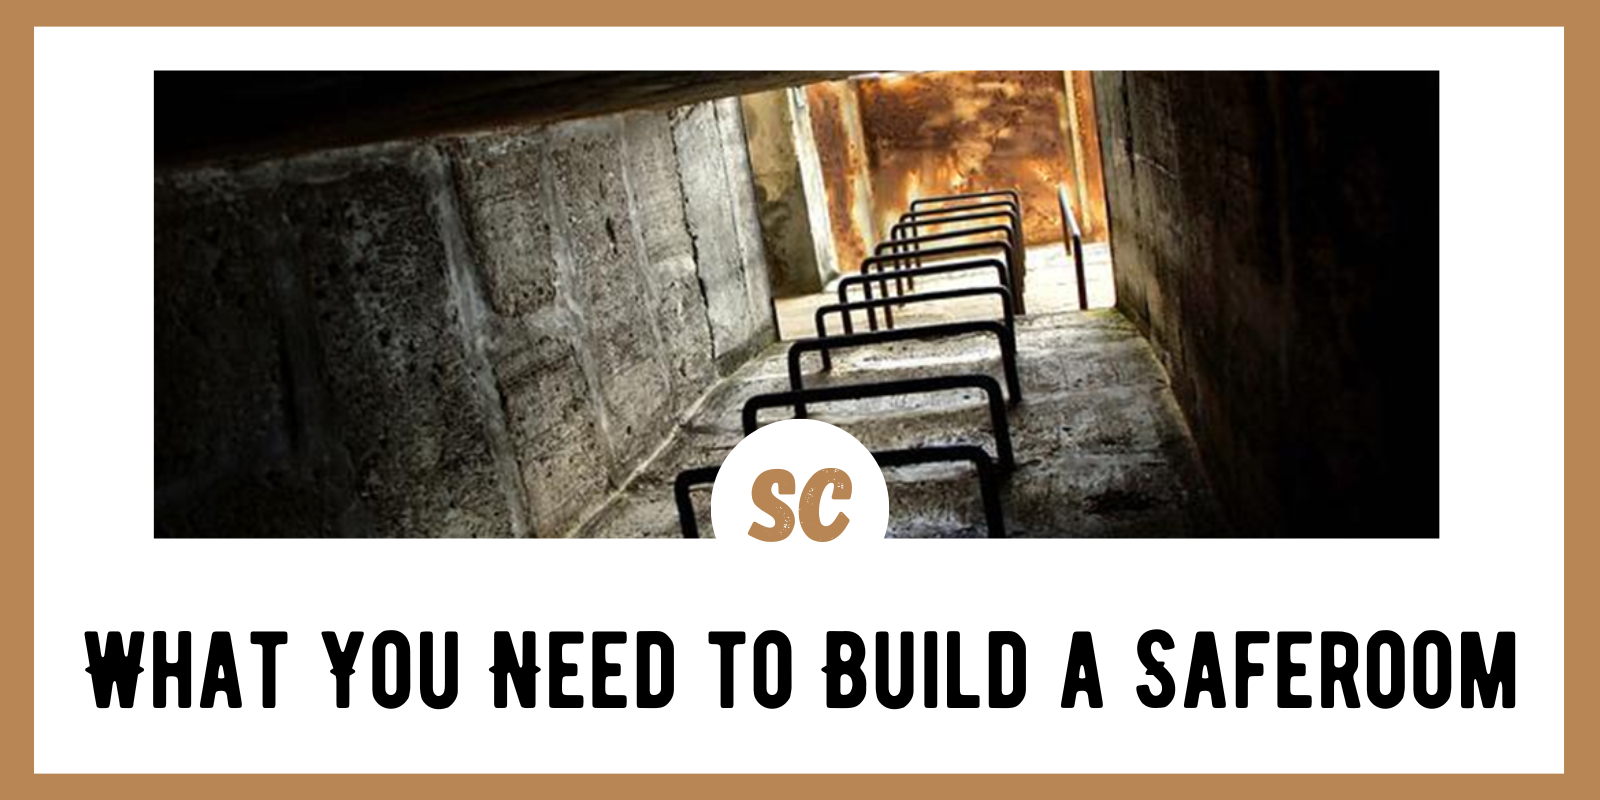 What You Need to Build a Saferoom